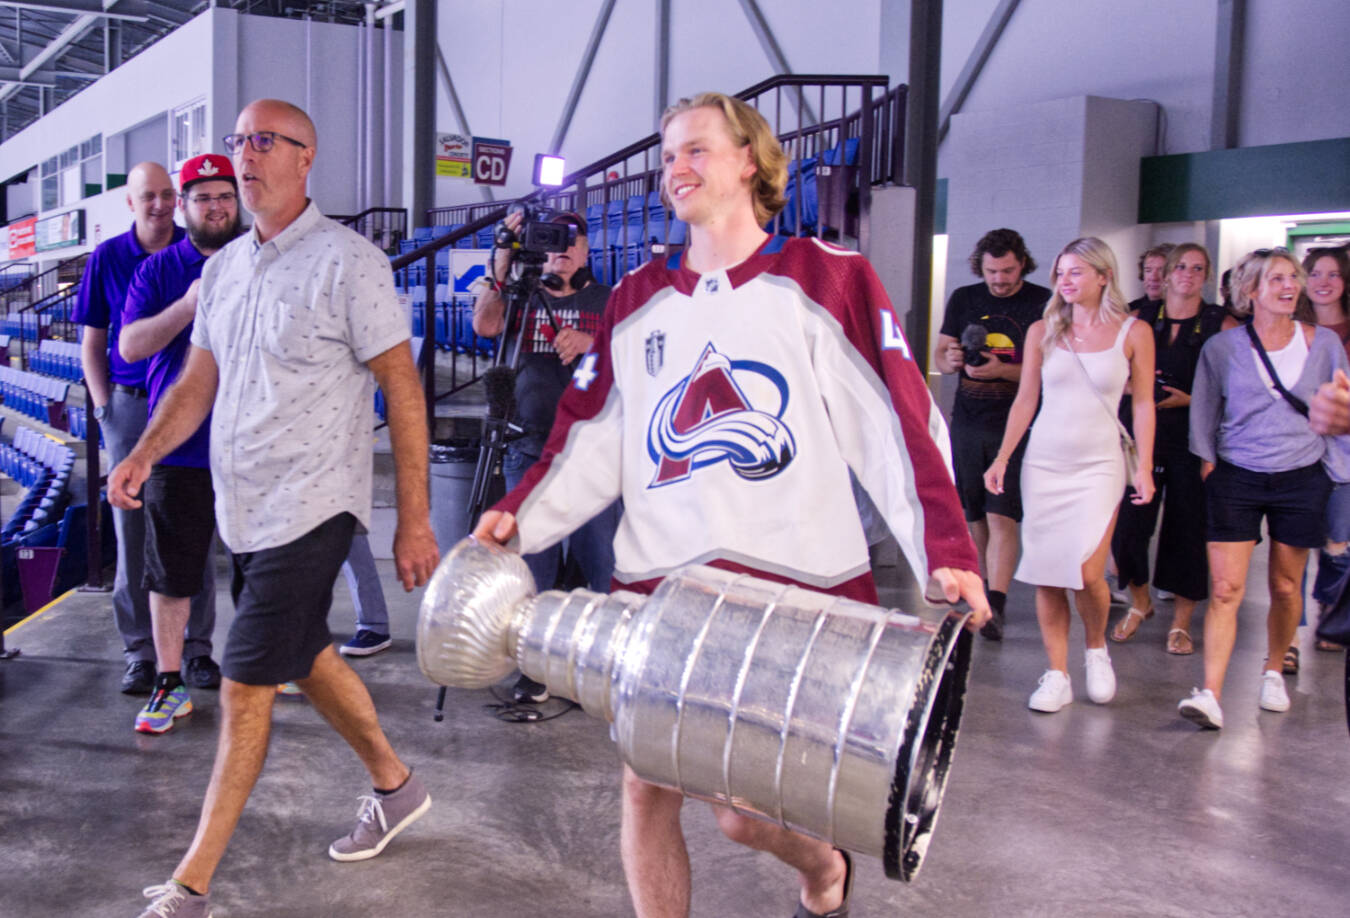 Bowen Byram, accompanied by friends and family, enters Western Financial Place with the Stanley Cup, Tuesday, August 16, for a public meet and greet. (Trevor Crawley photo)
Bowen Byram, accompanied by friends and family, enters Western Financial Place with the Stanley Cup, Tuesday, August 16, 2022 for a public meet and greet. (Trevor Crawley photo)